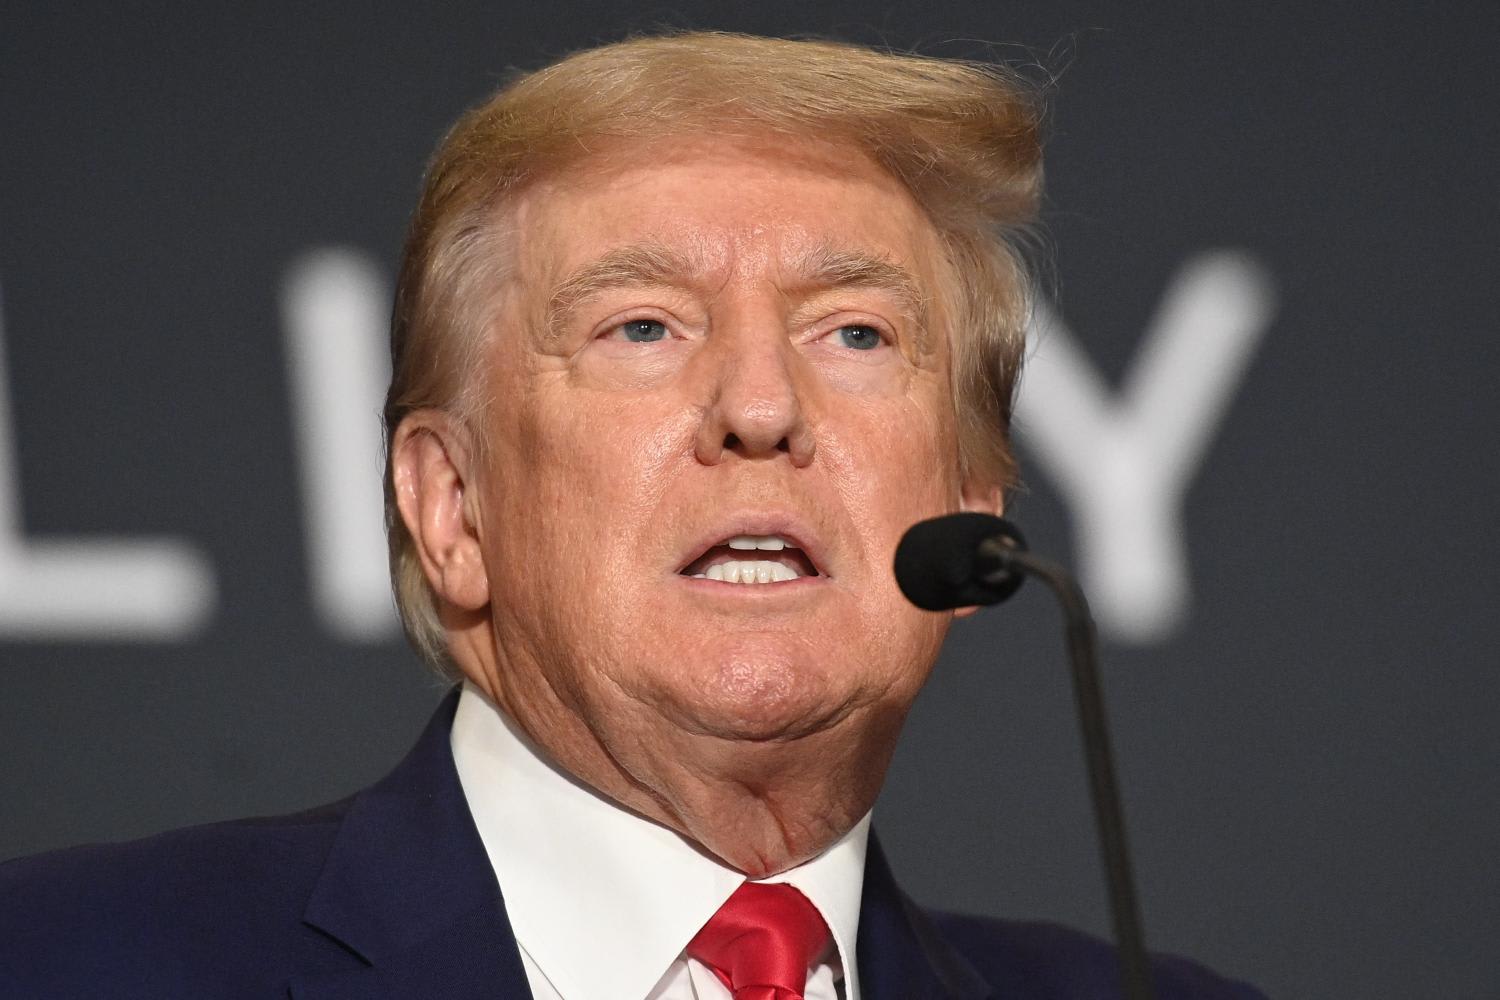 Former US President Donald Trump speaks at the America First Policy Institute Agenda Summit in Washington on July 26, 2022.